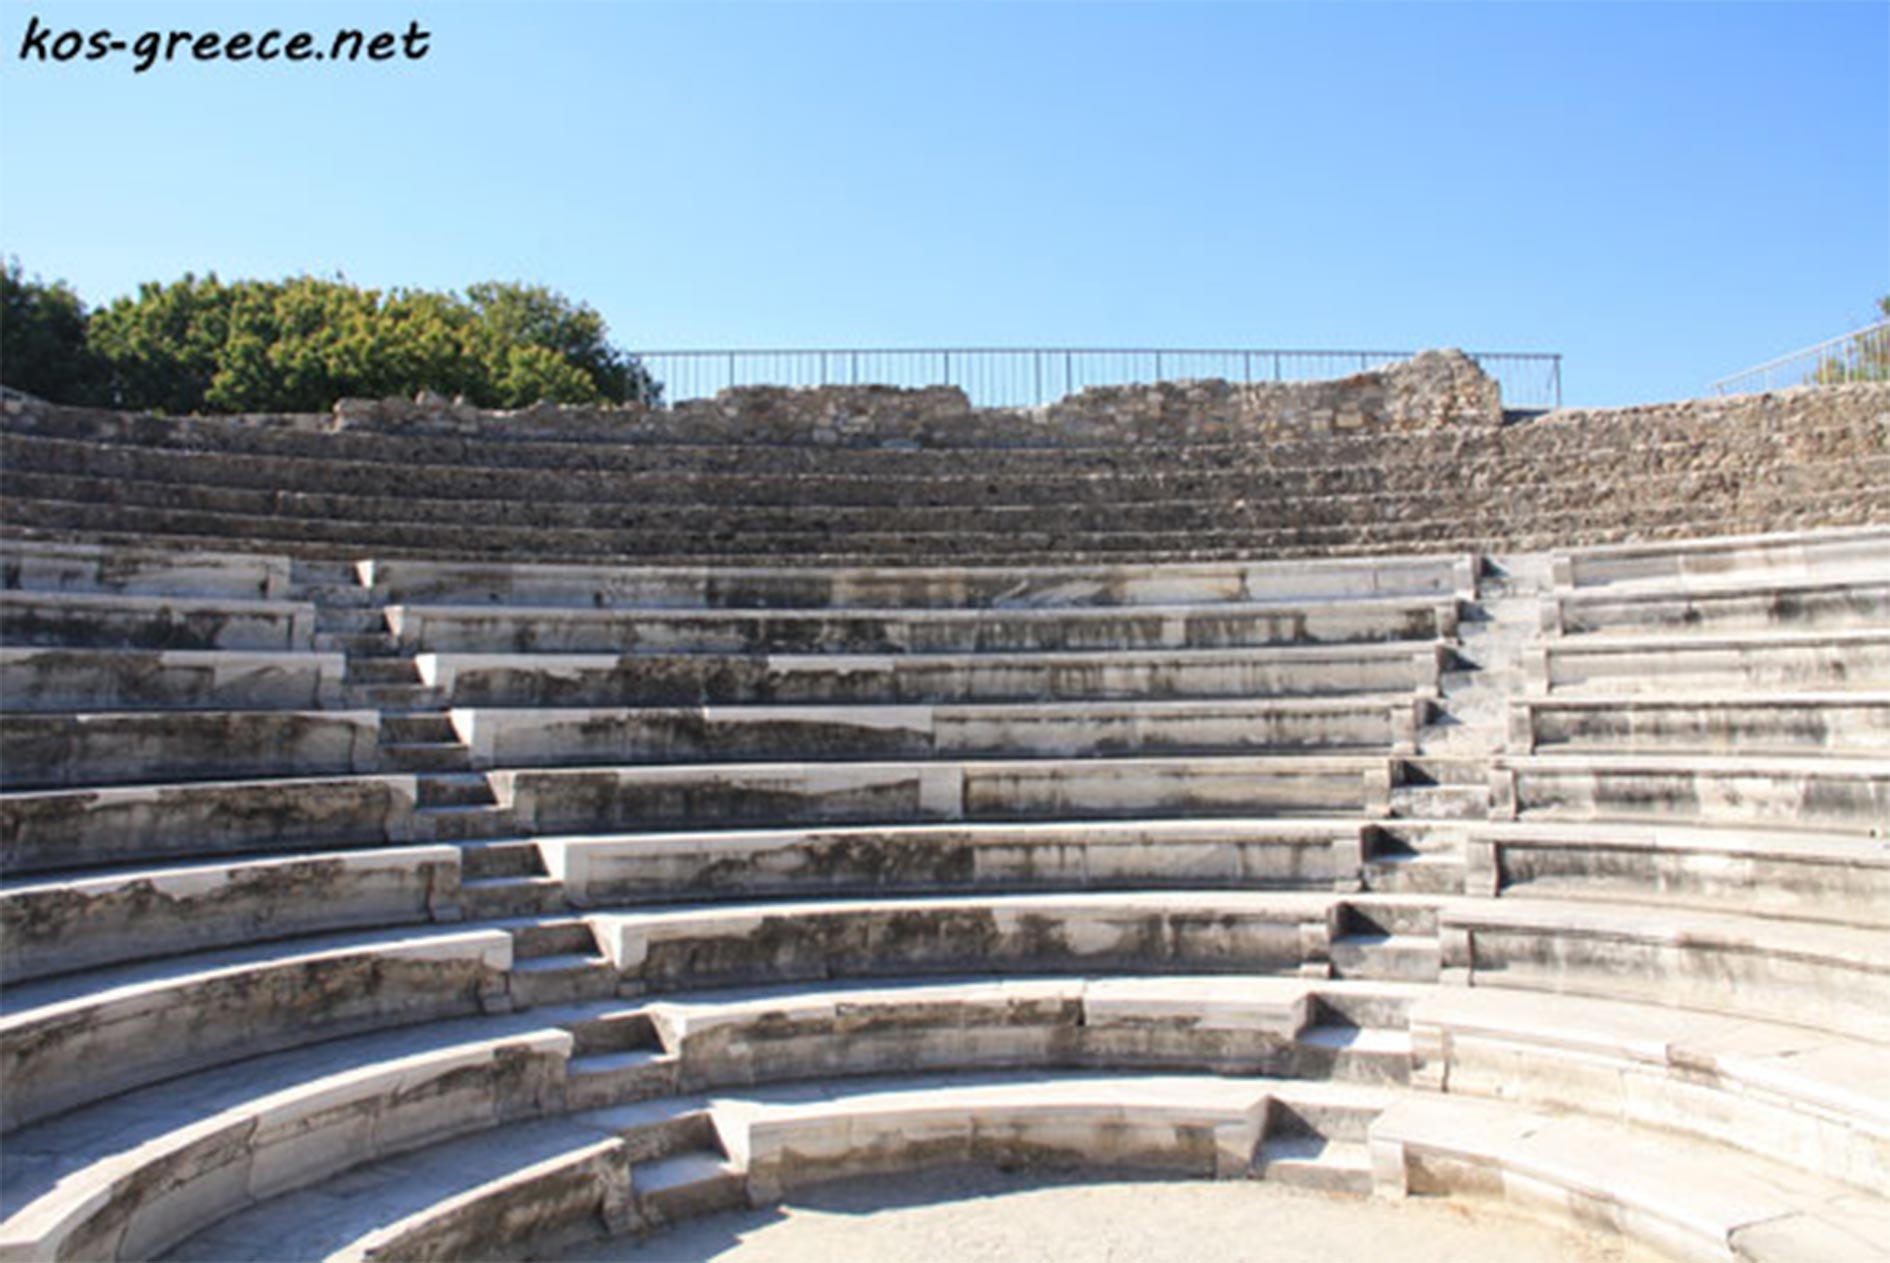 Ancient Odeon